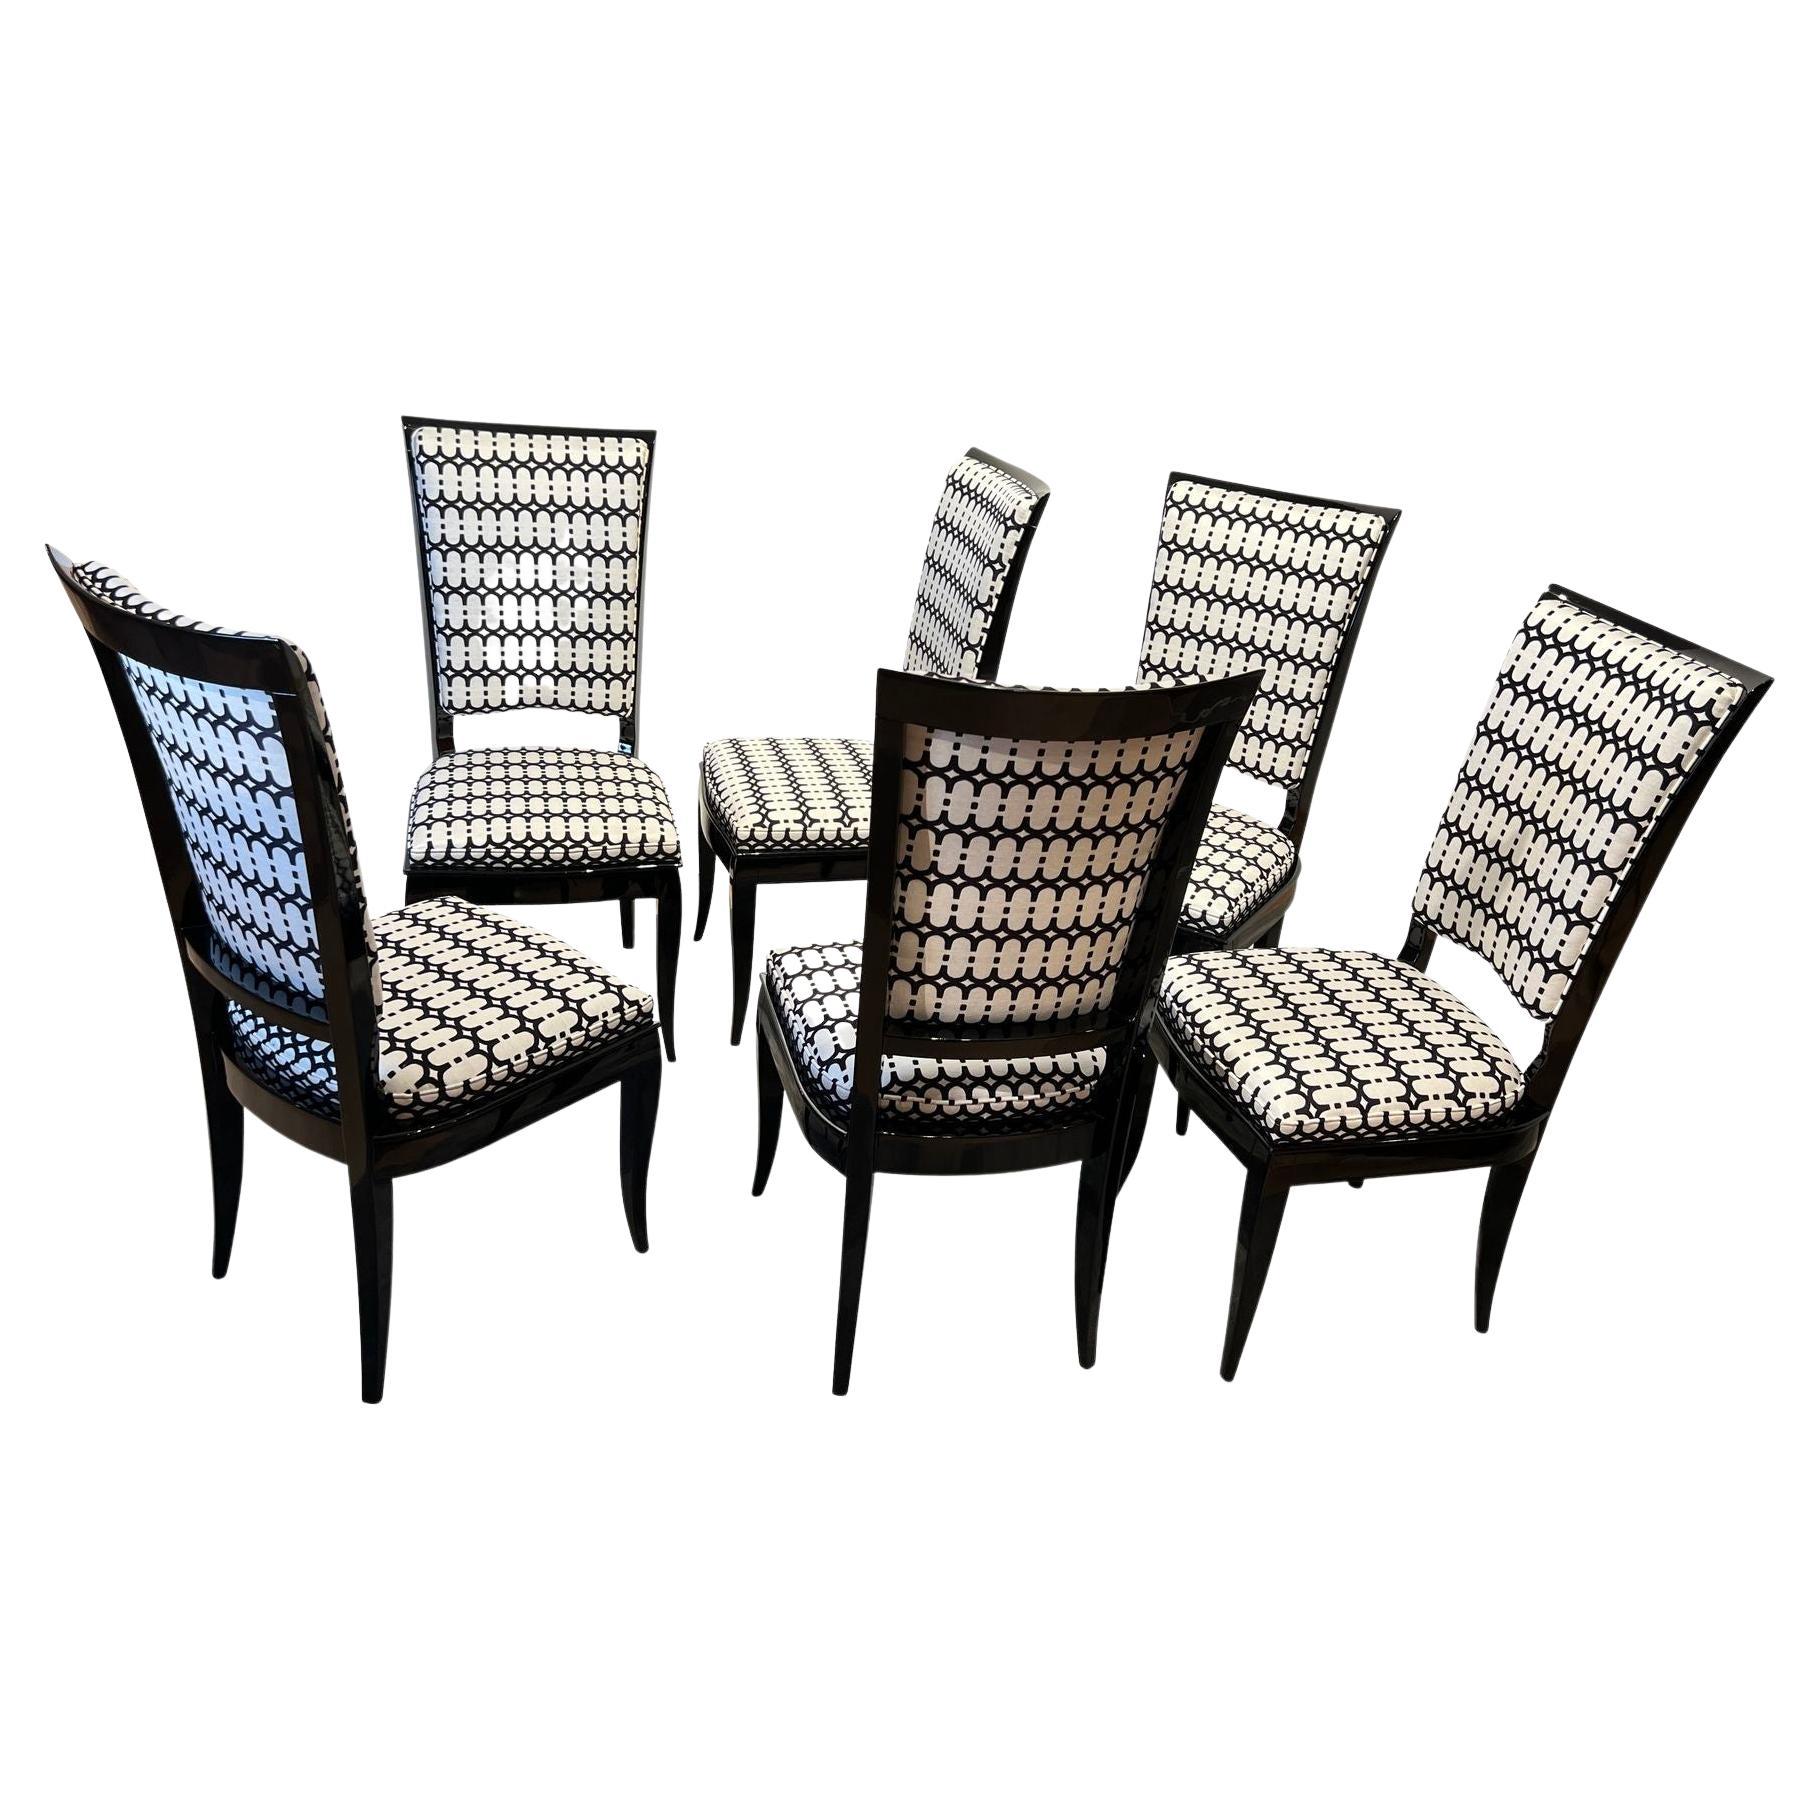 Set of Six Art Deco High Back Dining Chairs, Black Lacquer, France, circa 1930 For Sale